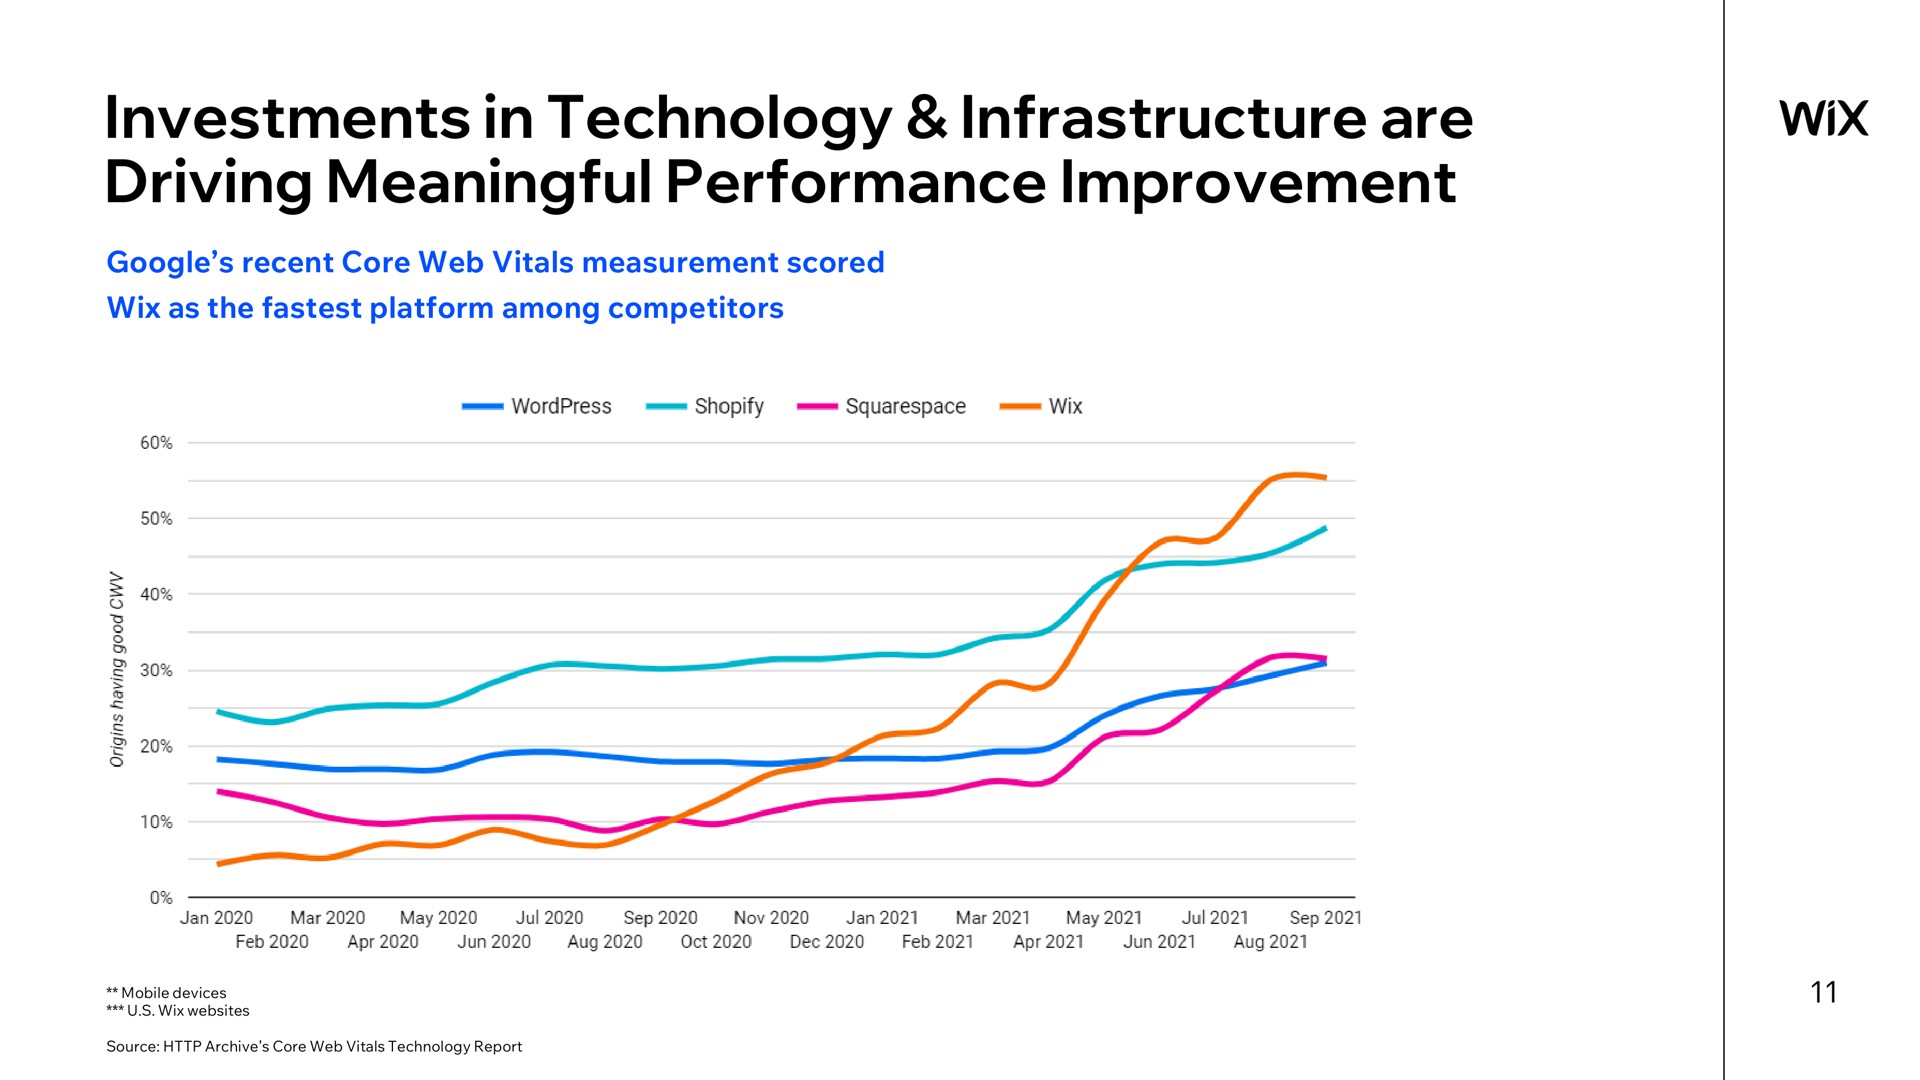 investments in technology infrastructure are driving meaningful performance improvement | Wix